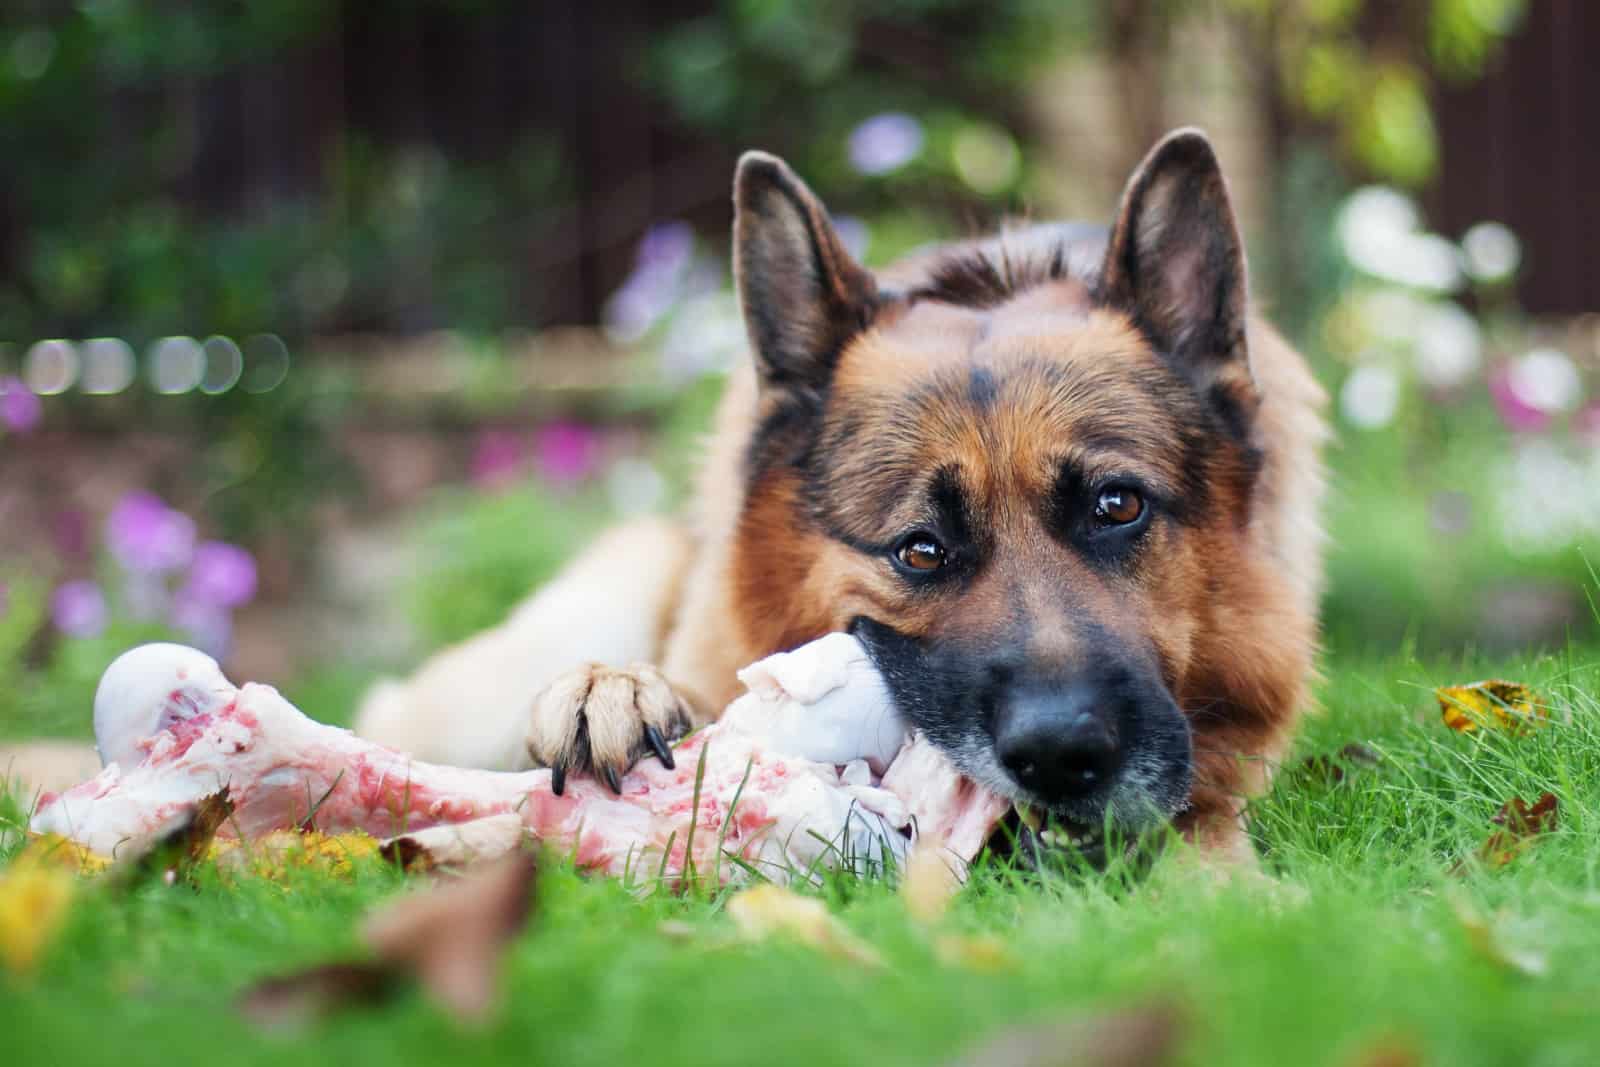 close up of German shepherd dog chewing on a bone in garden